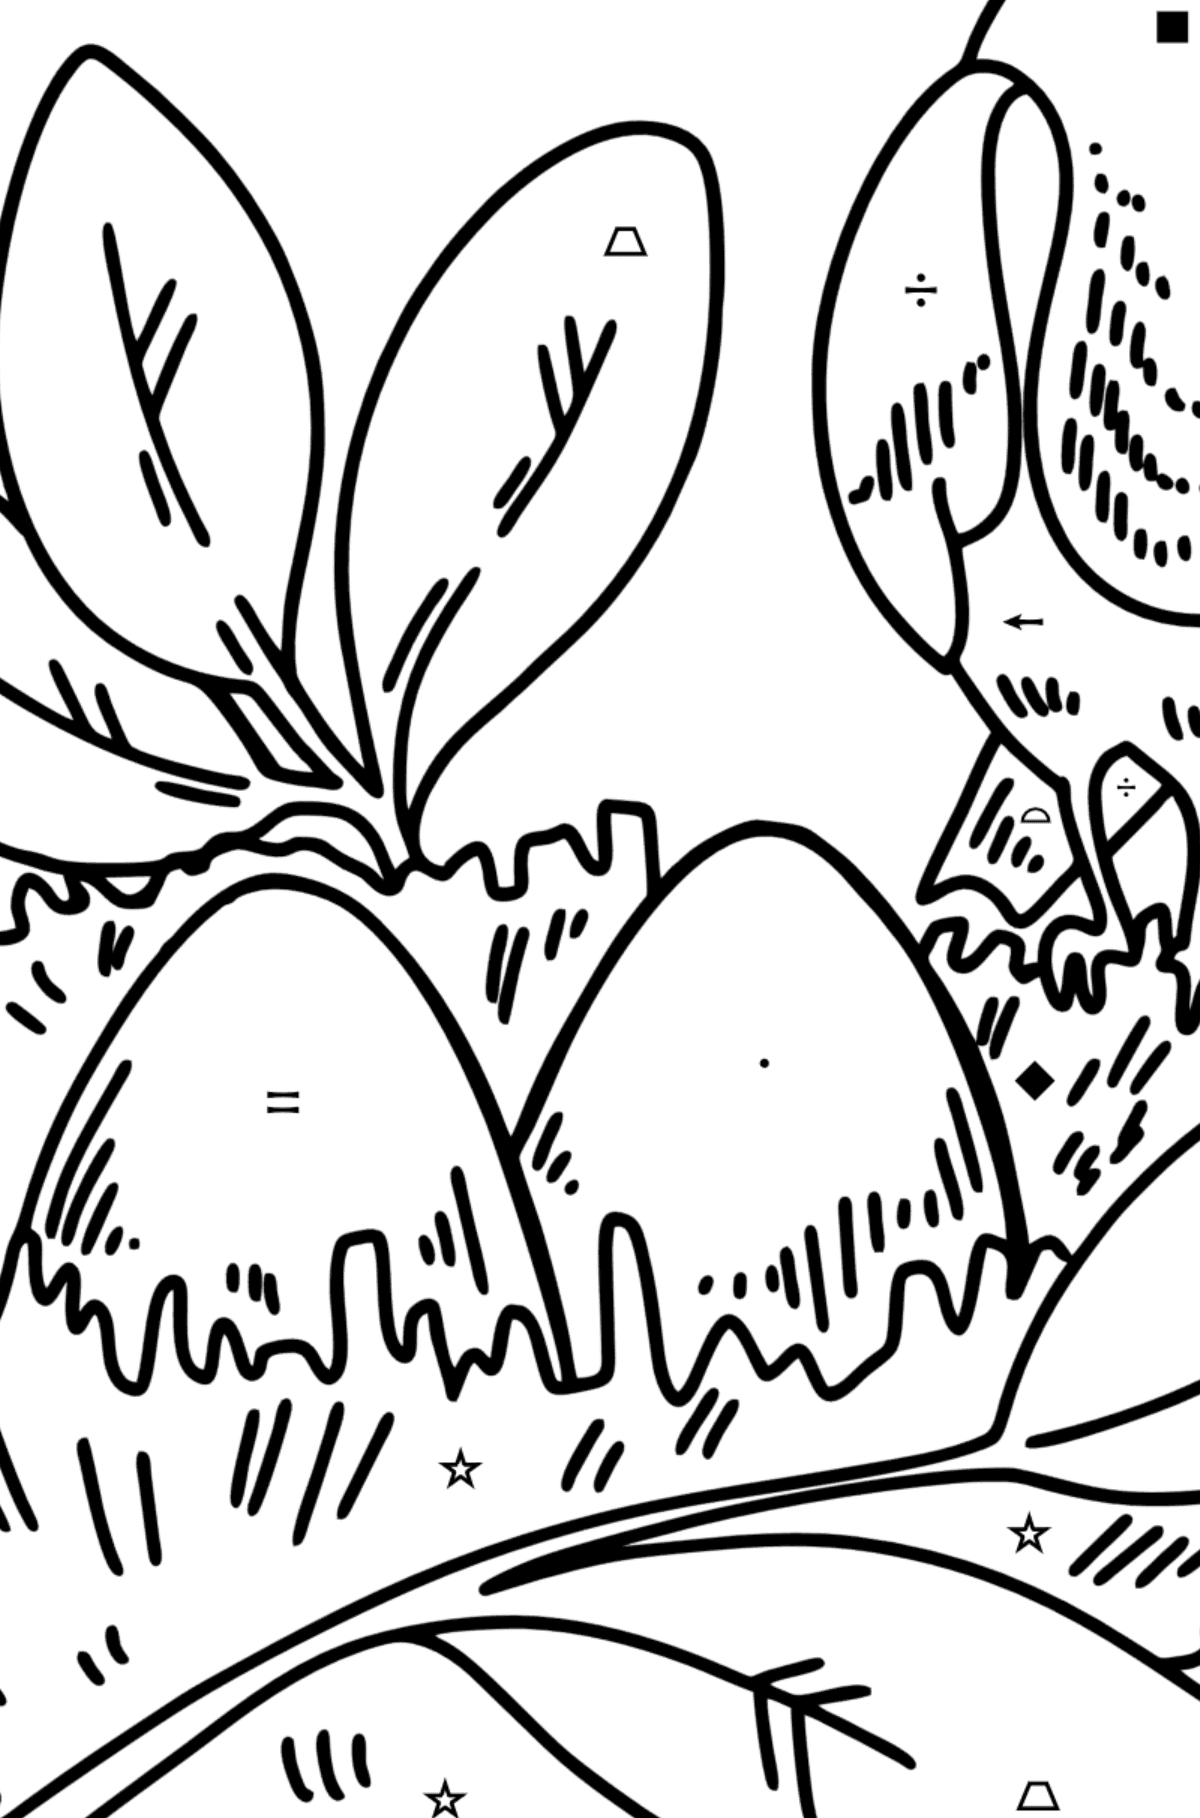 Coloring page - Thrush Nest - Coloring by Symbols and Geometric Shapes for Kids